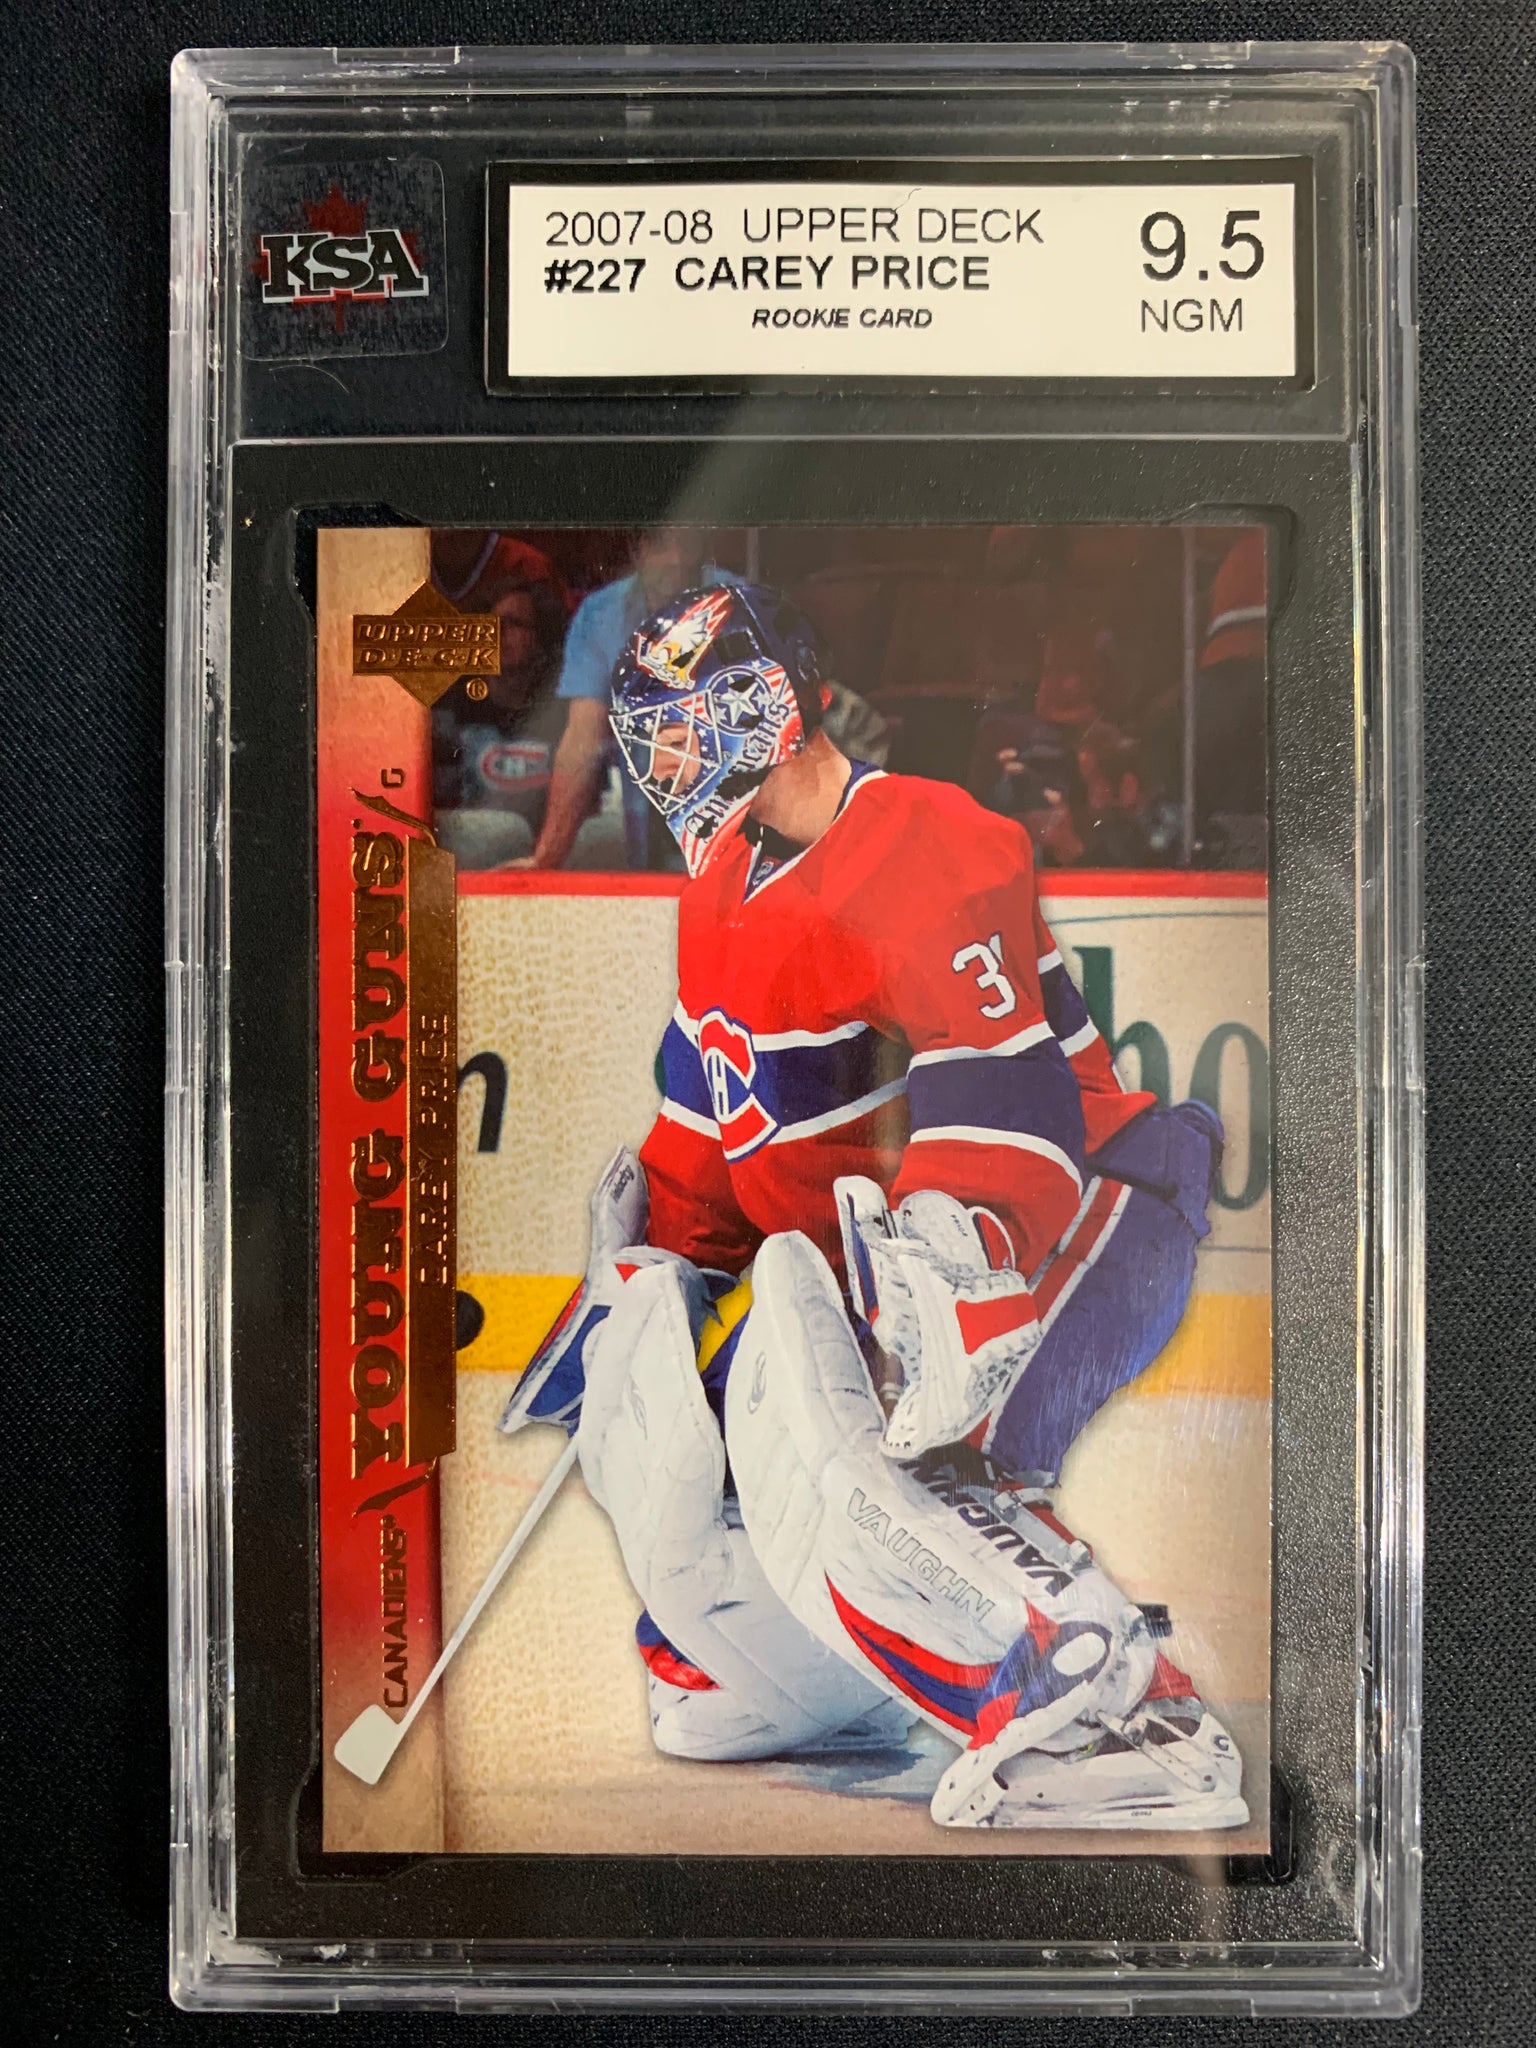 2007-08 UPPER DECK HOCKEY #227 MONTREAL CANADIENS - CAREY PRICE YOUNG GUNS ROOKIE CARD GRADED KSA 9.5 NGM